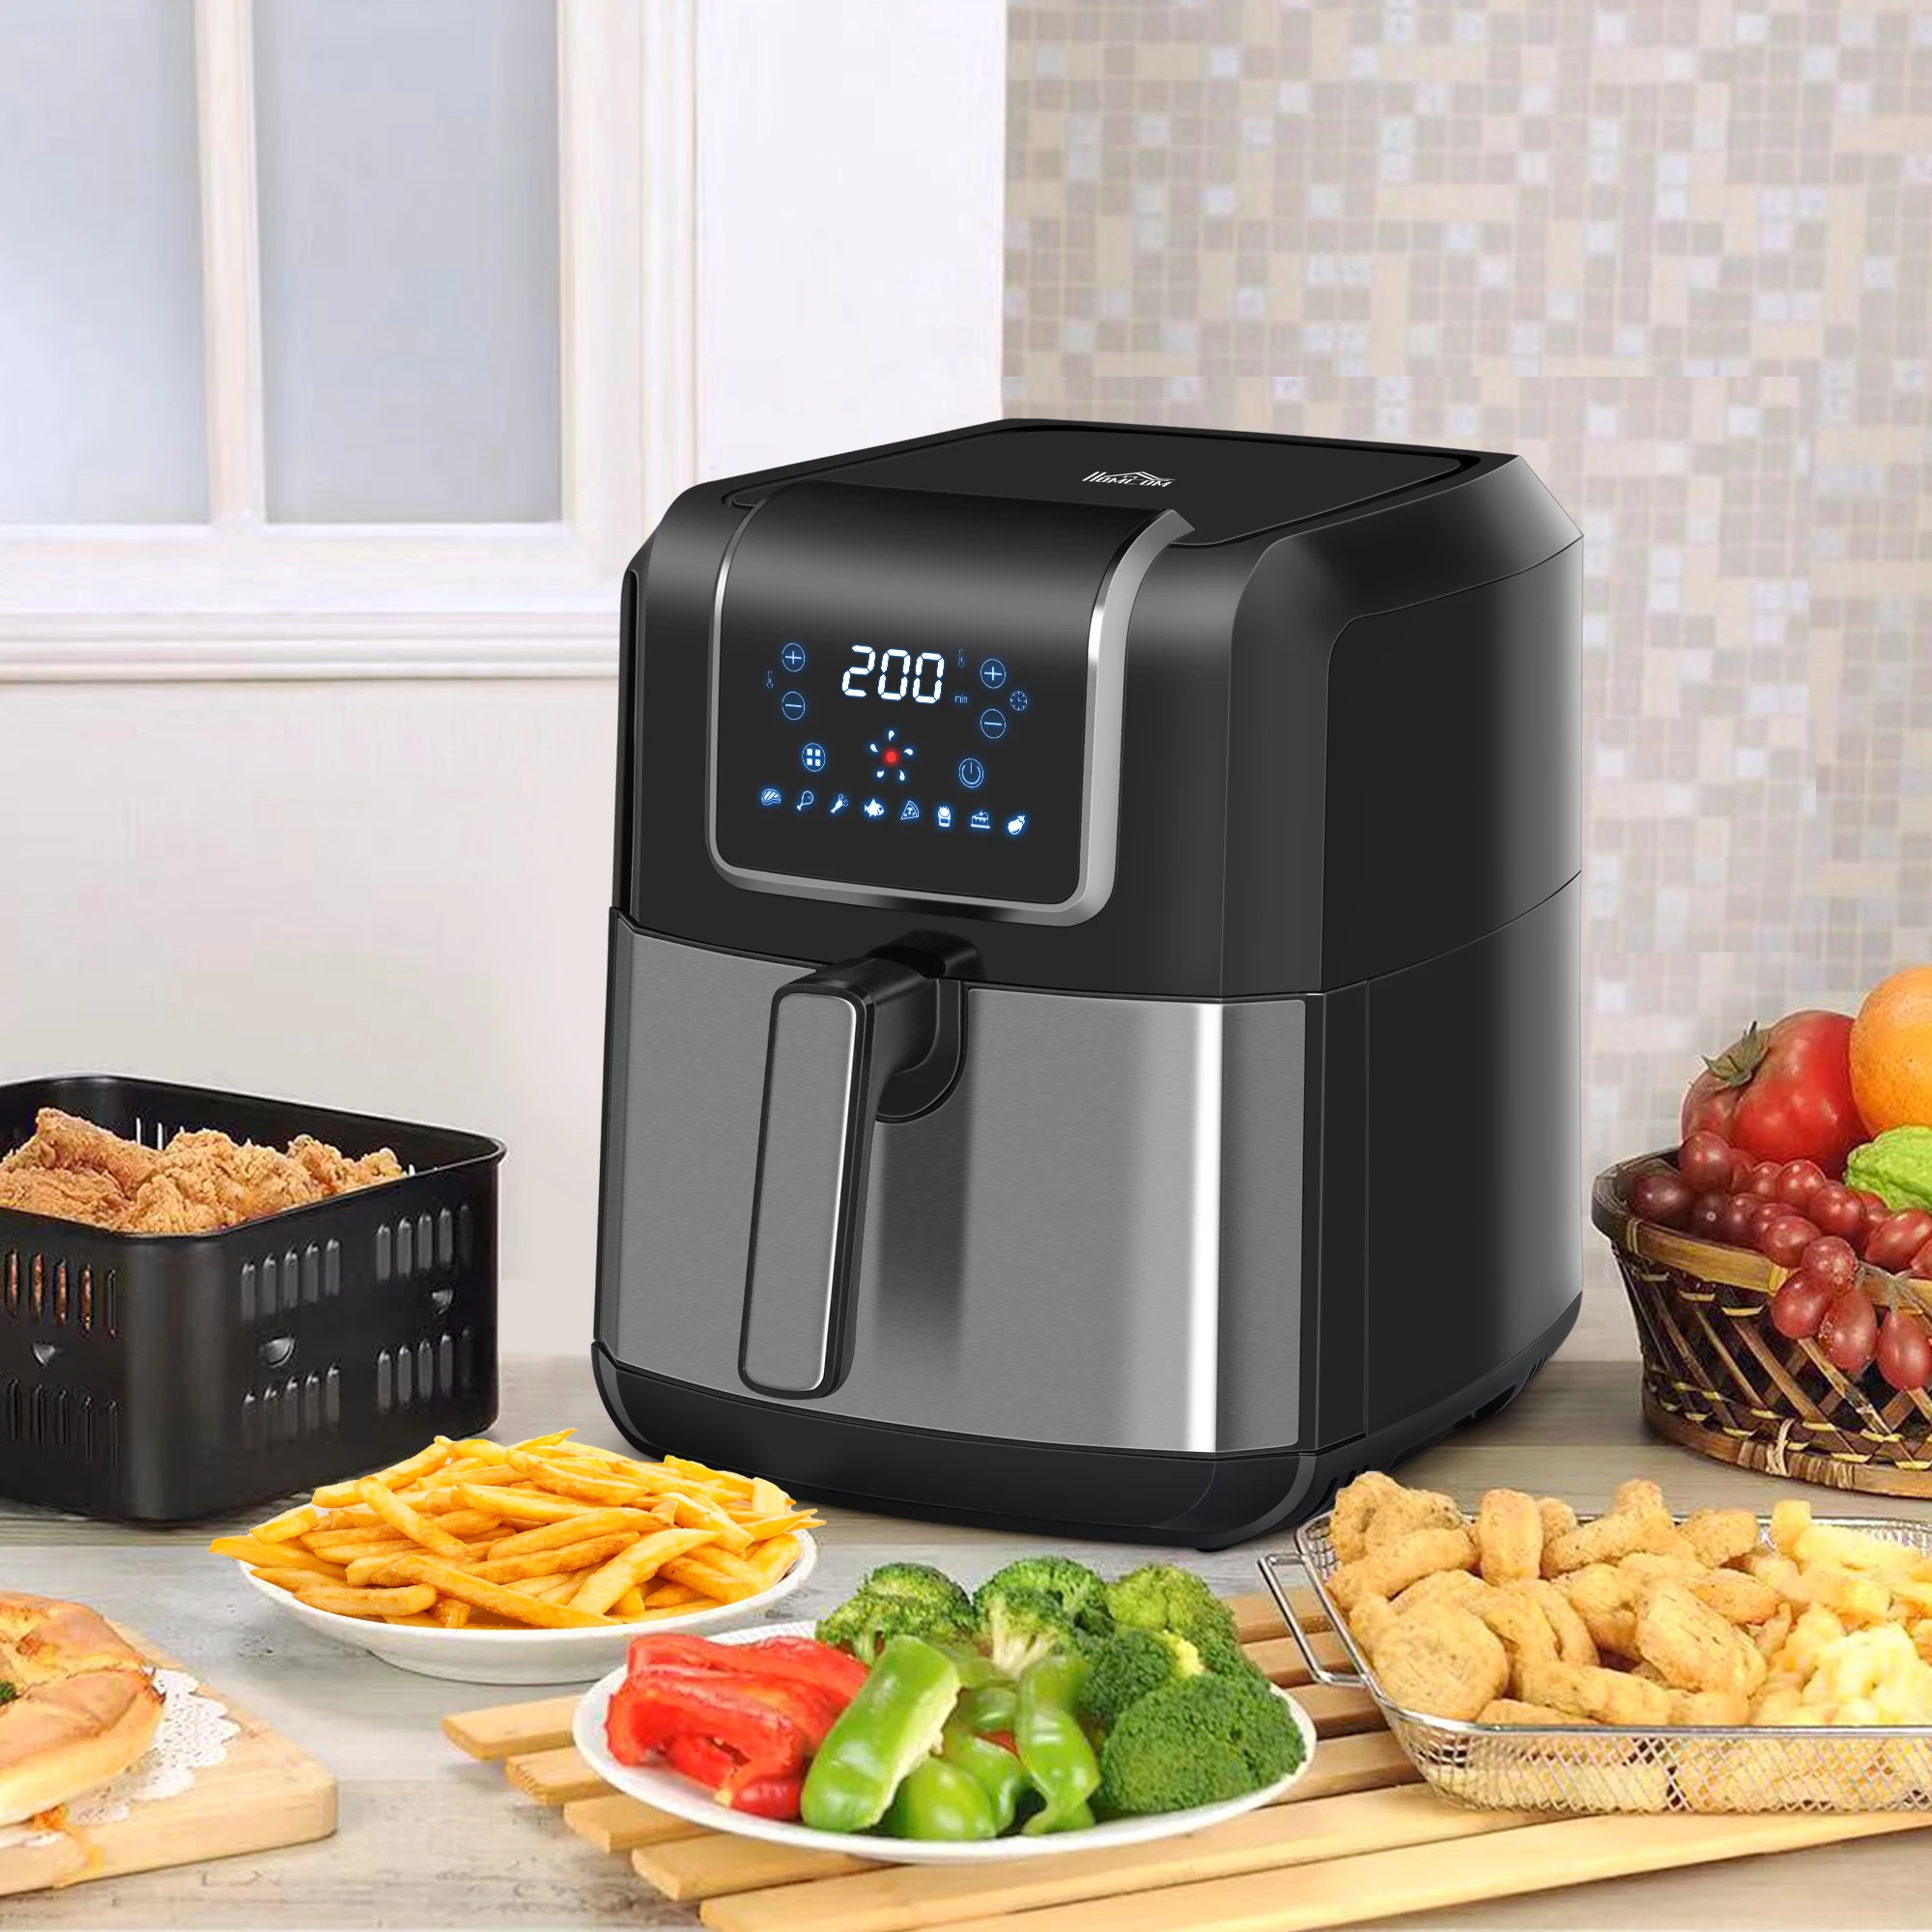 https://ae01.alicdn.com/kf/S06e320aee564436284ccf8ae099d8c2a9/HOMCOM-Oil-Free-Fryer-6-5L-1700W-Hot-Air-Fryer-with-8-Programs-LED-Display-Touch.jpg